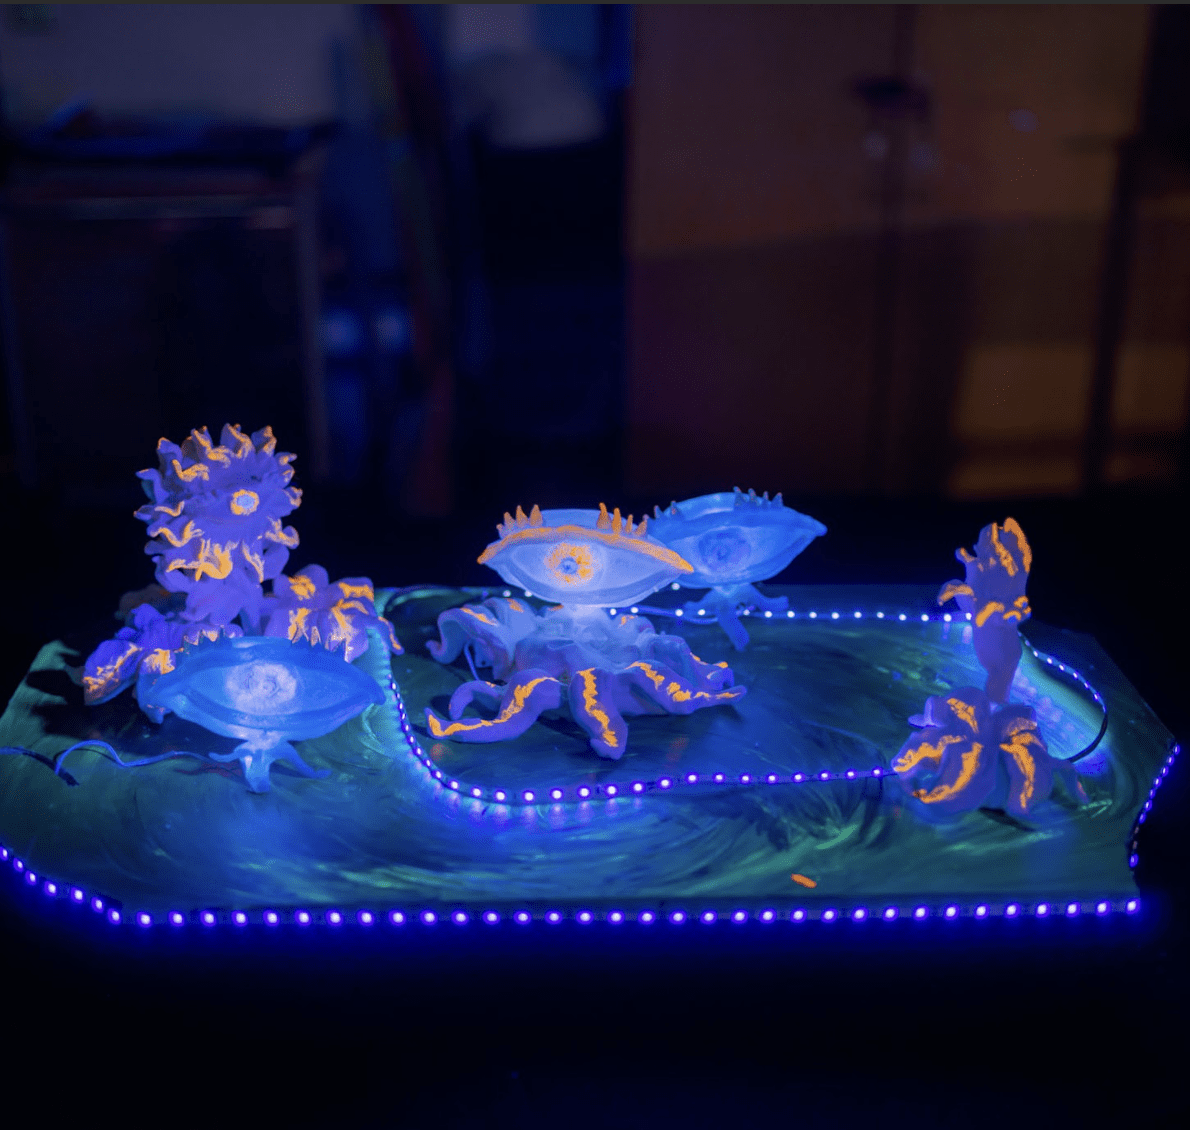 A small, glowing sculpture of anthropomorphic aliens. The sculpture glows in blue light.